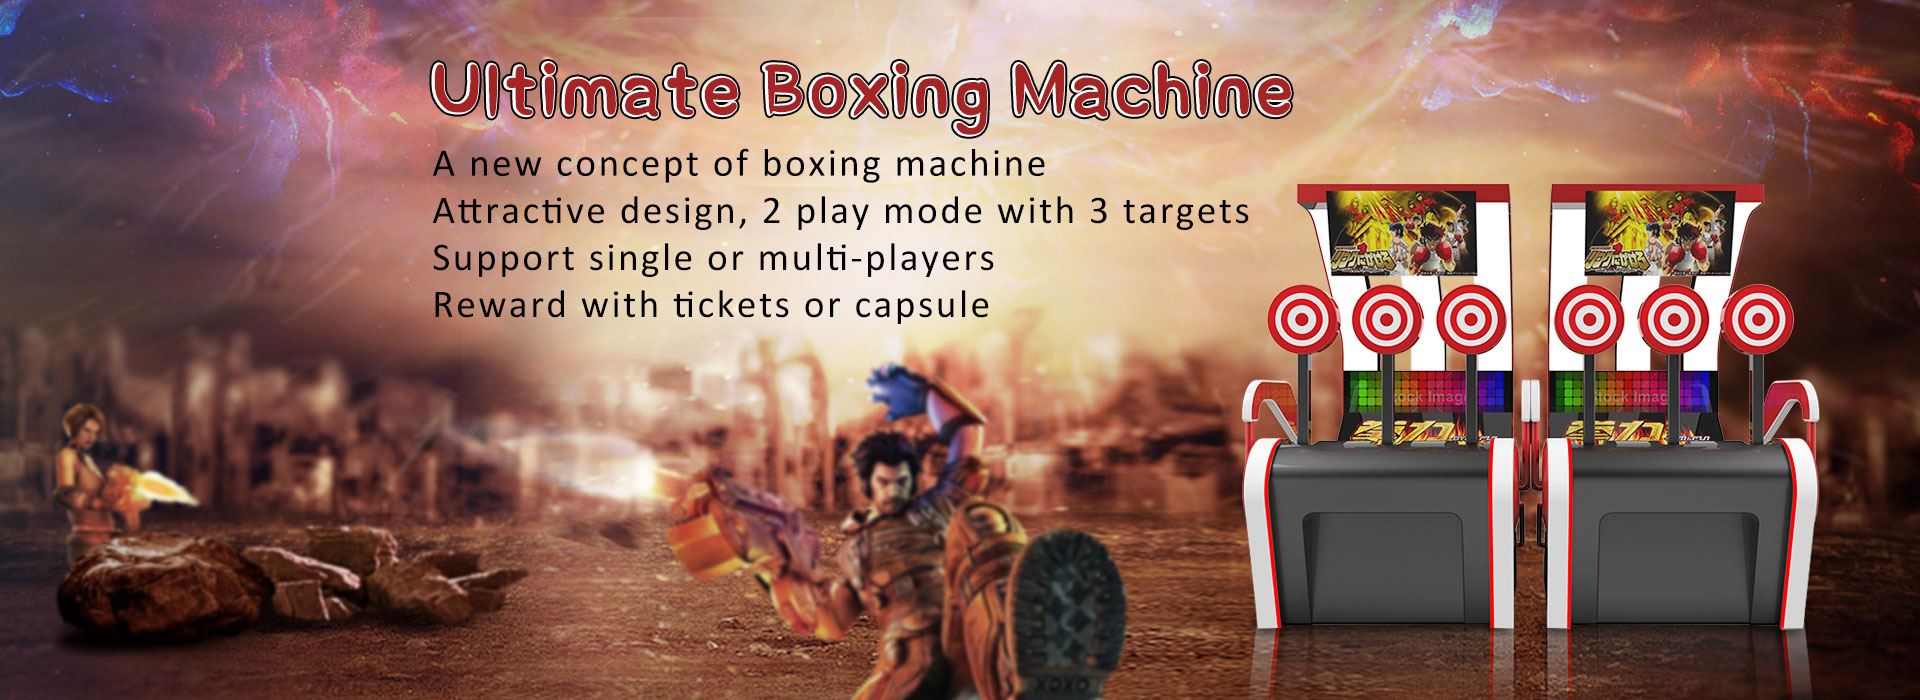 Ultimate boxing arcade game